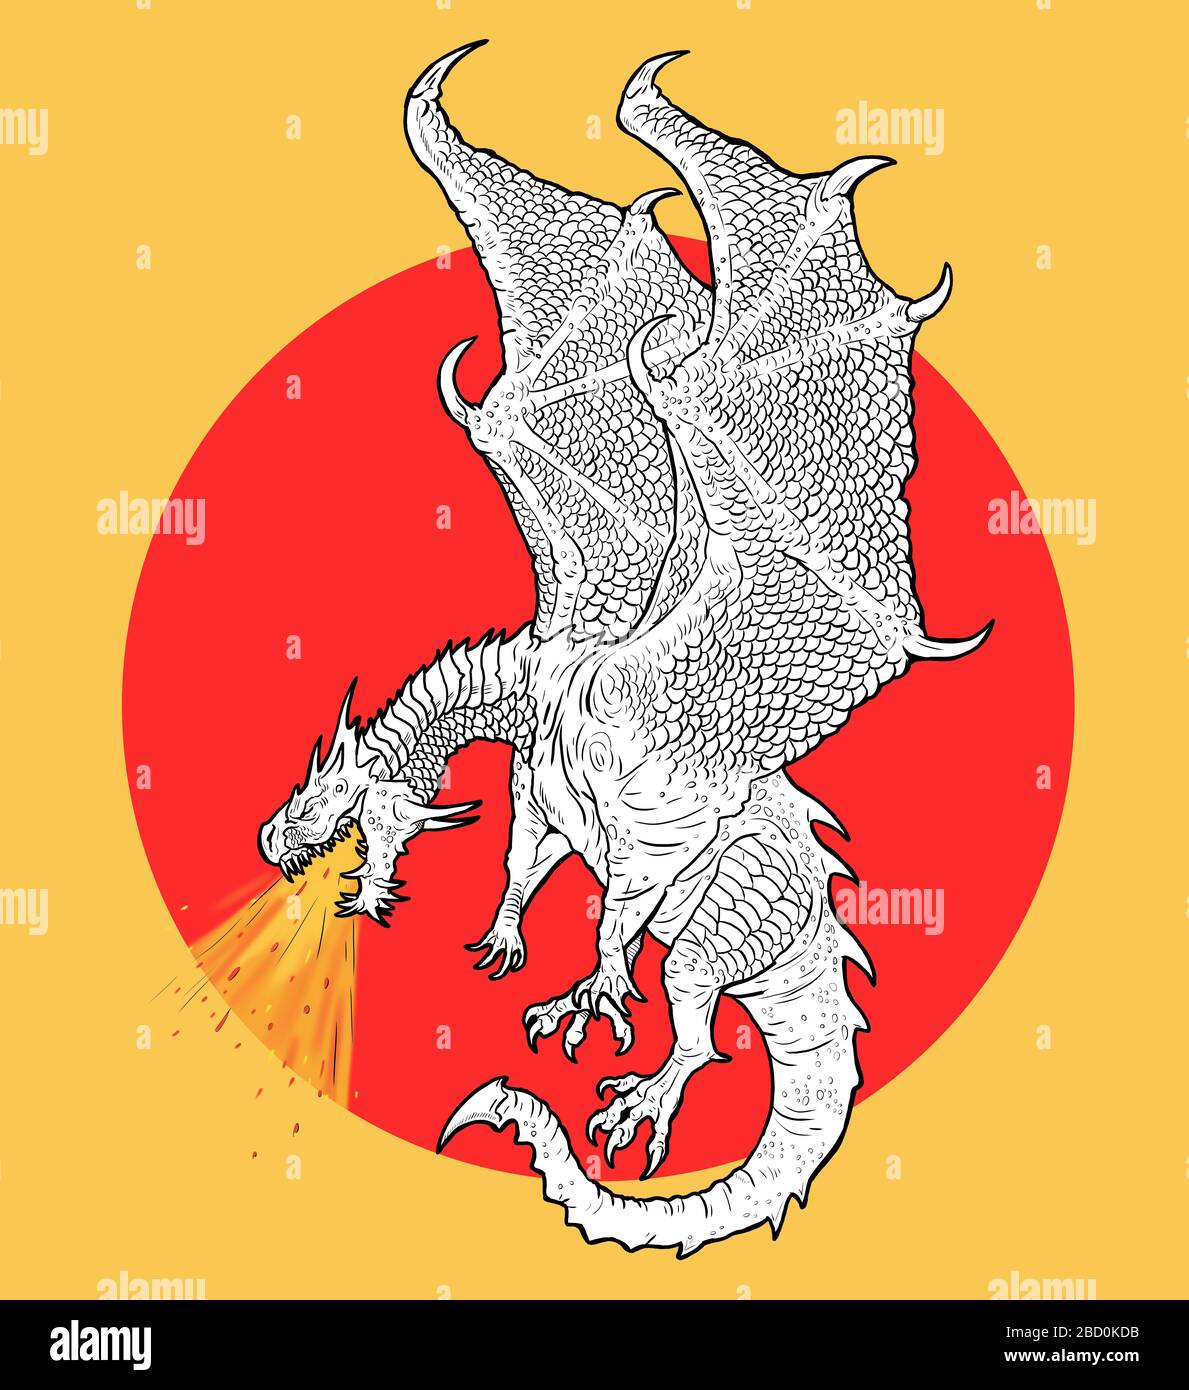 Flying dragon spits fire. Fantasy creature drawing. Stock Photo